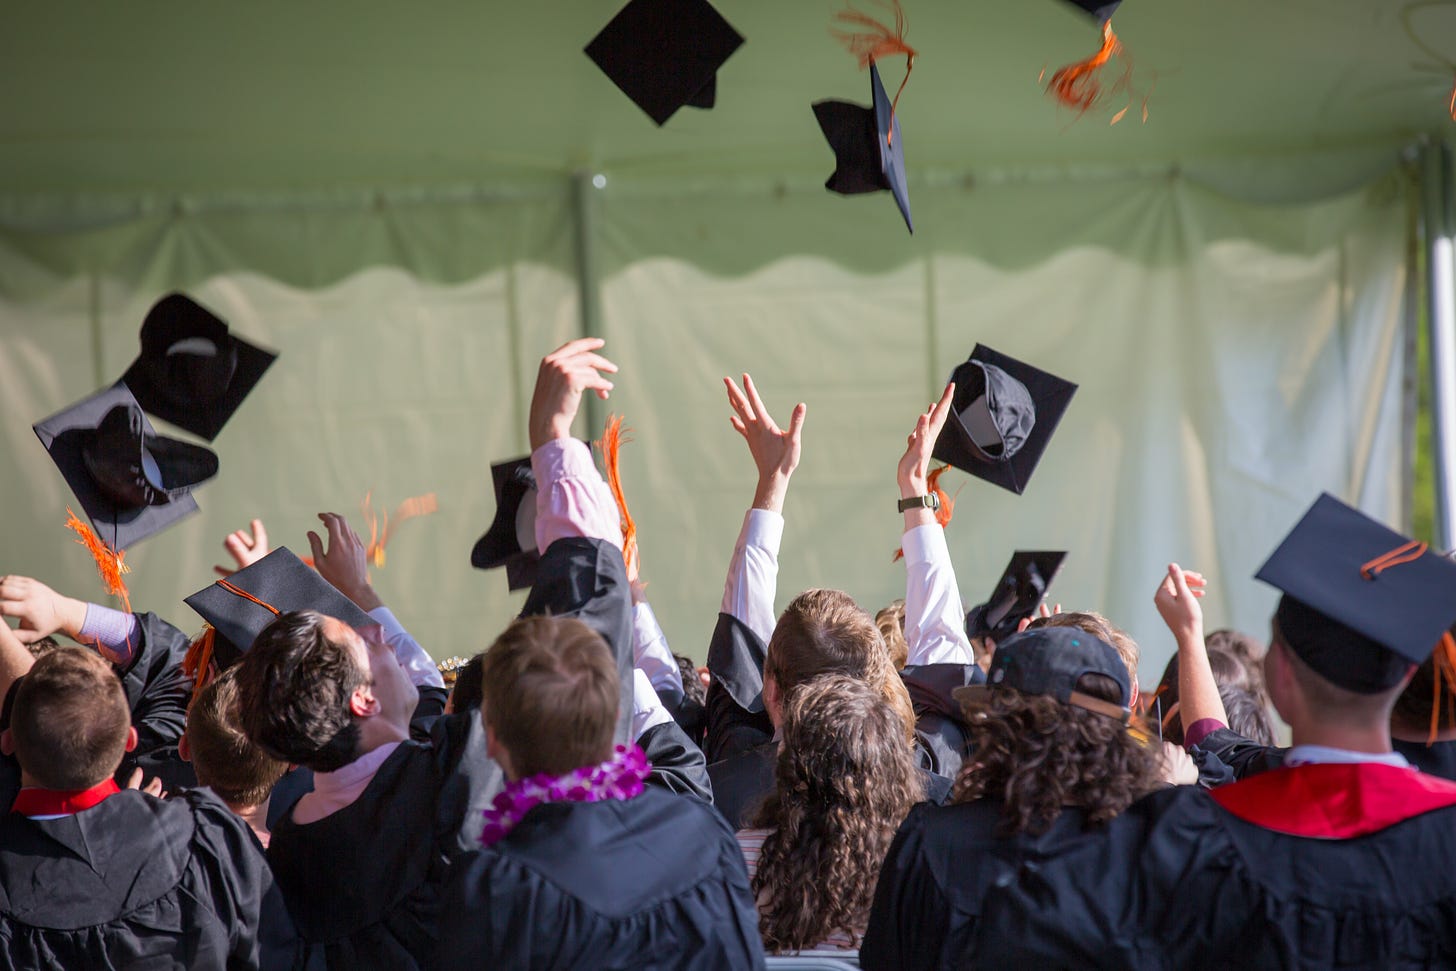 A group of graduates throwing their caps into the air.